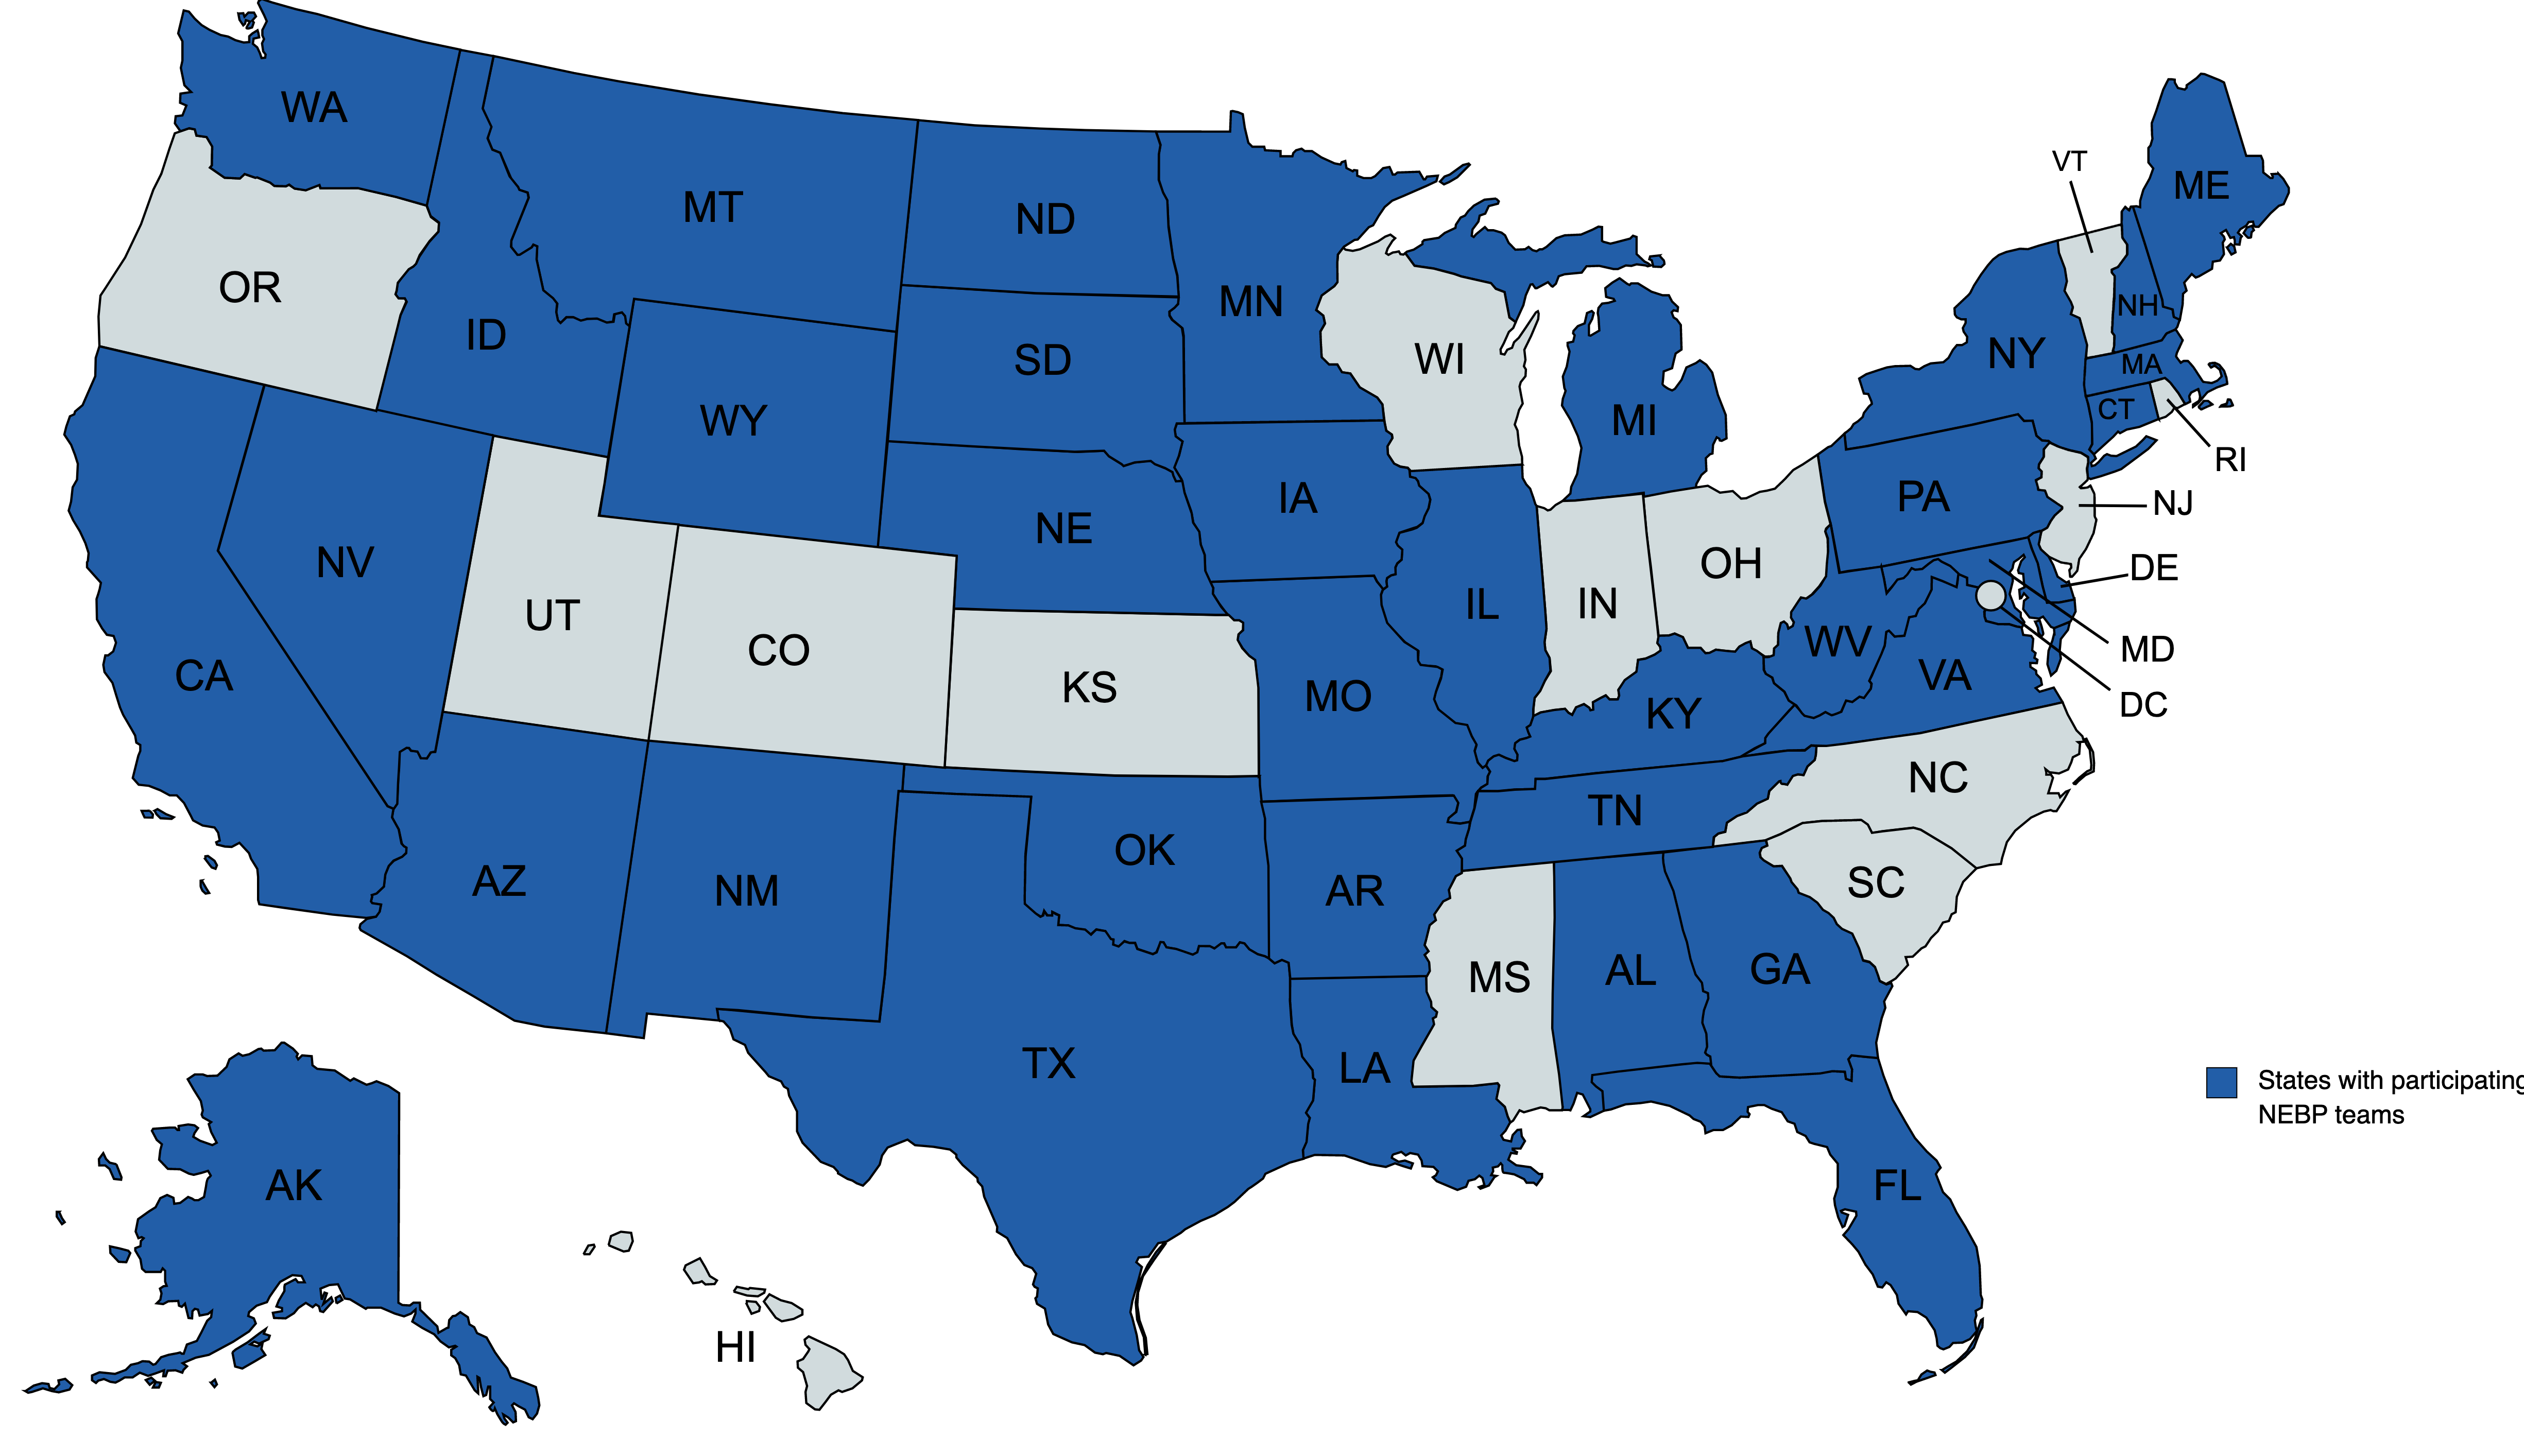 37 states are highlighted in blue, indicating which states have participating NEBP teams in the upcoming 2023 and 2024 eclipses.